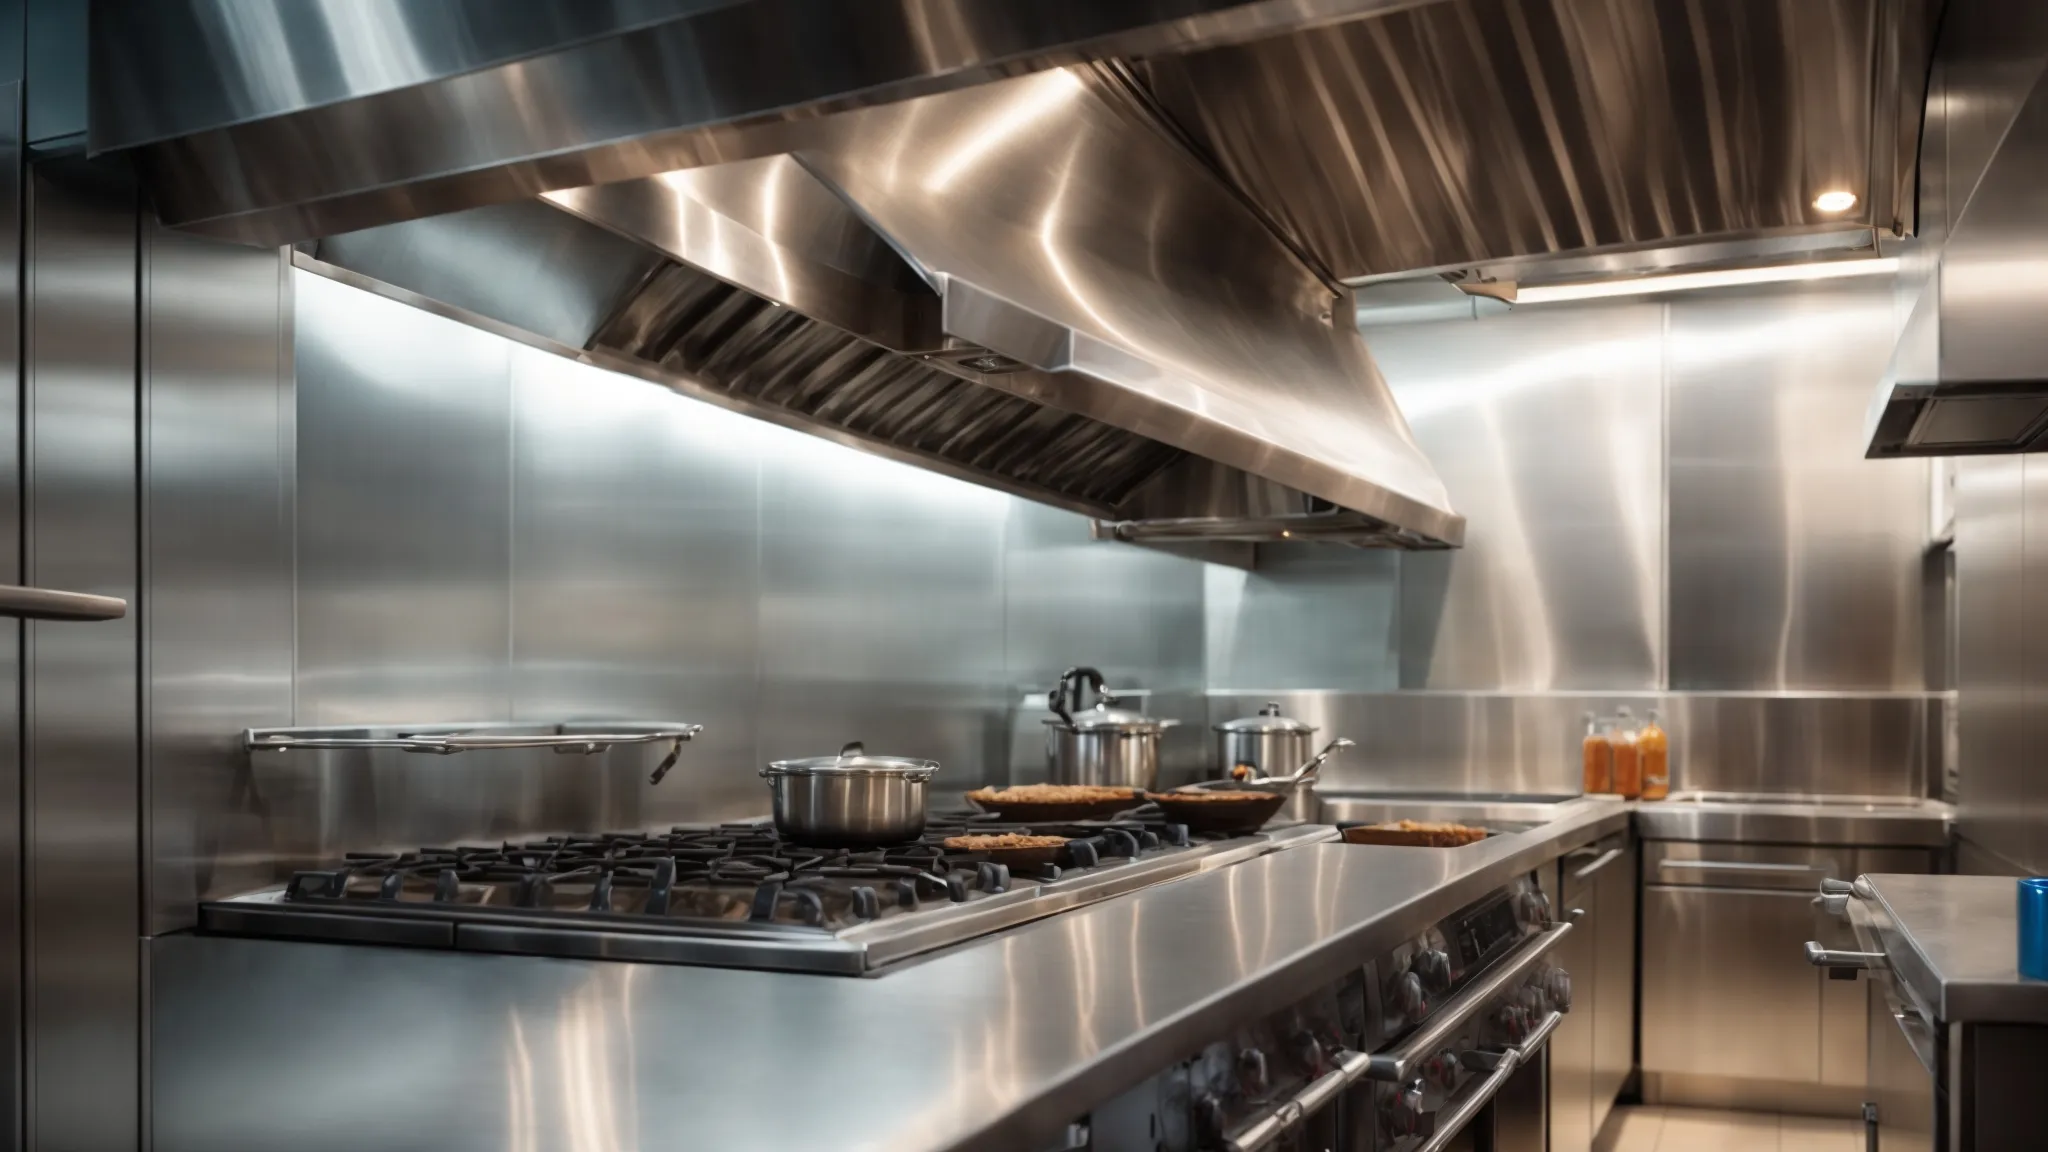 a professional kitchen gleams under bright lights, showcasing a shining, clean exhaust hood above a pristine cooking range.